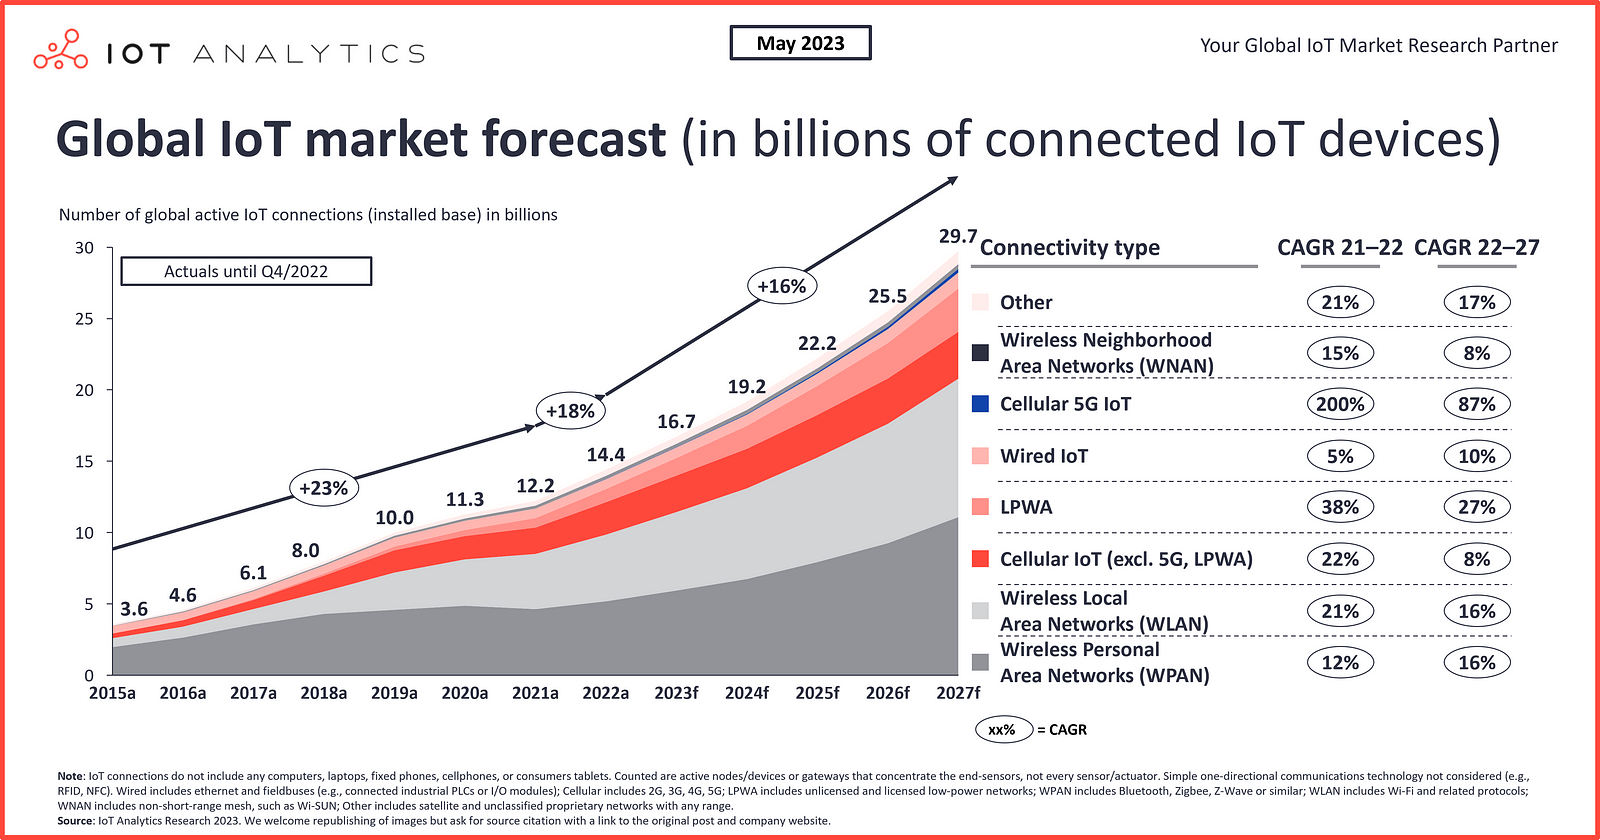 In 2023, IoT Analytics expects the global number of connected IoT devices to grow another 16%, to 16.7 billion active endpoints.